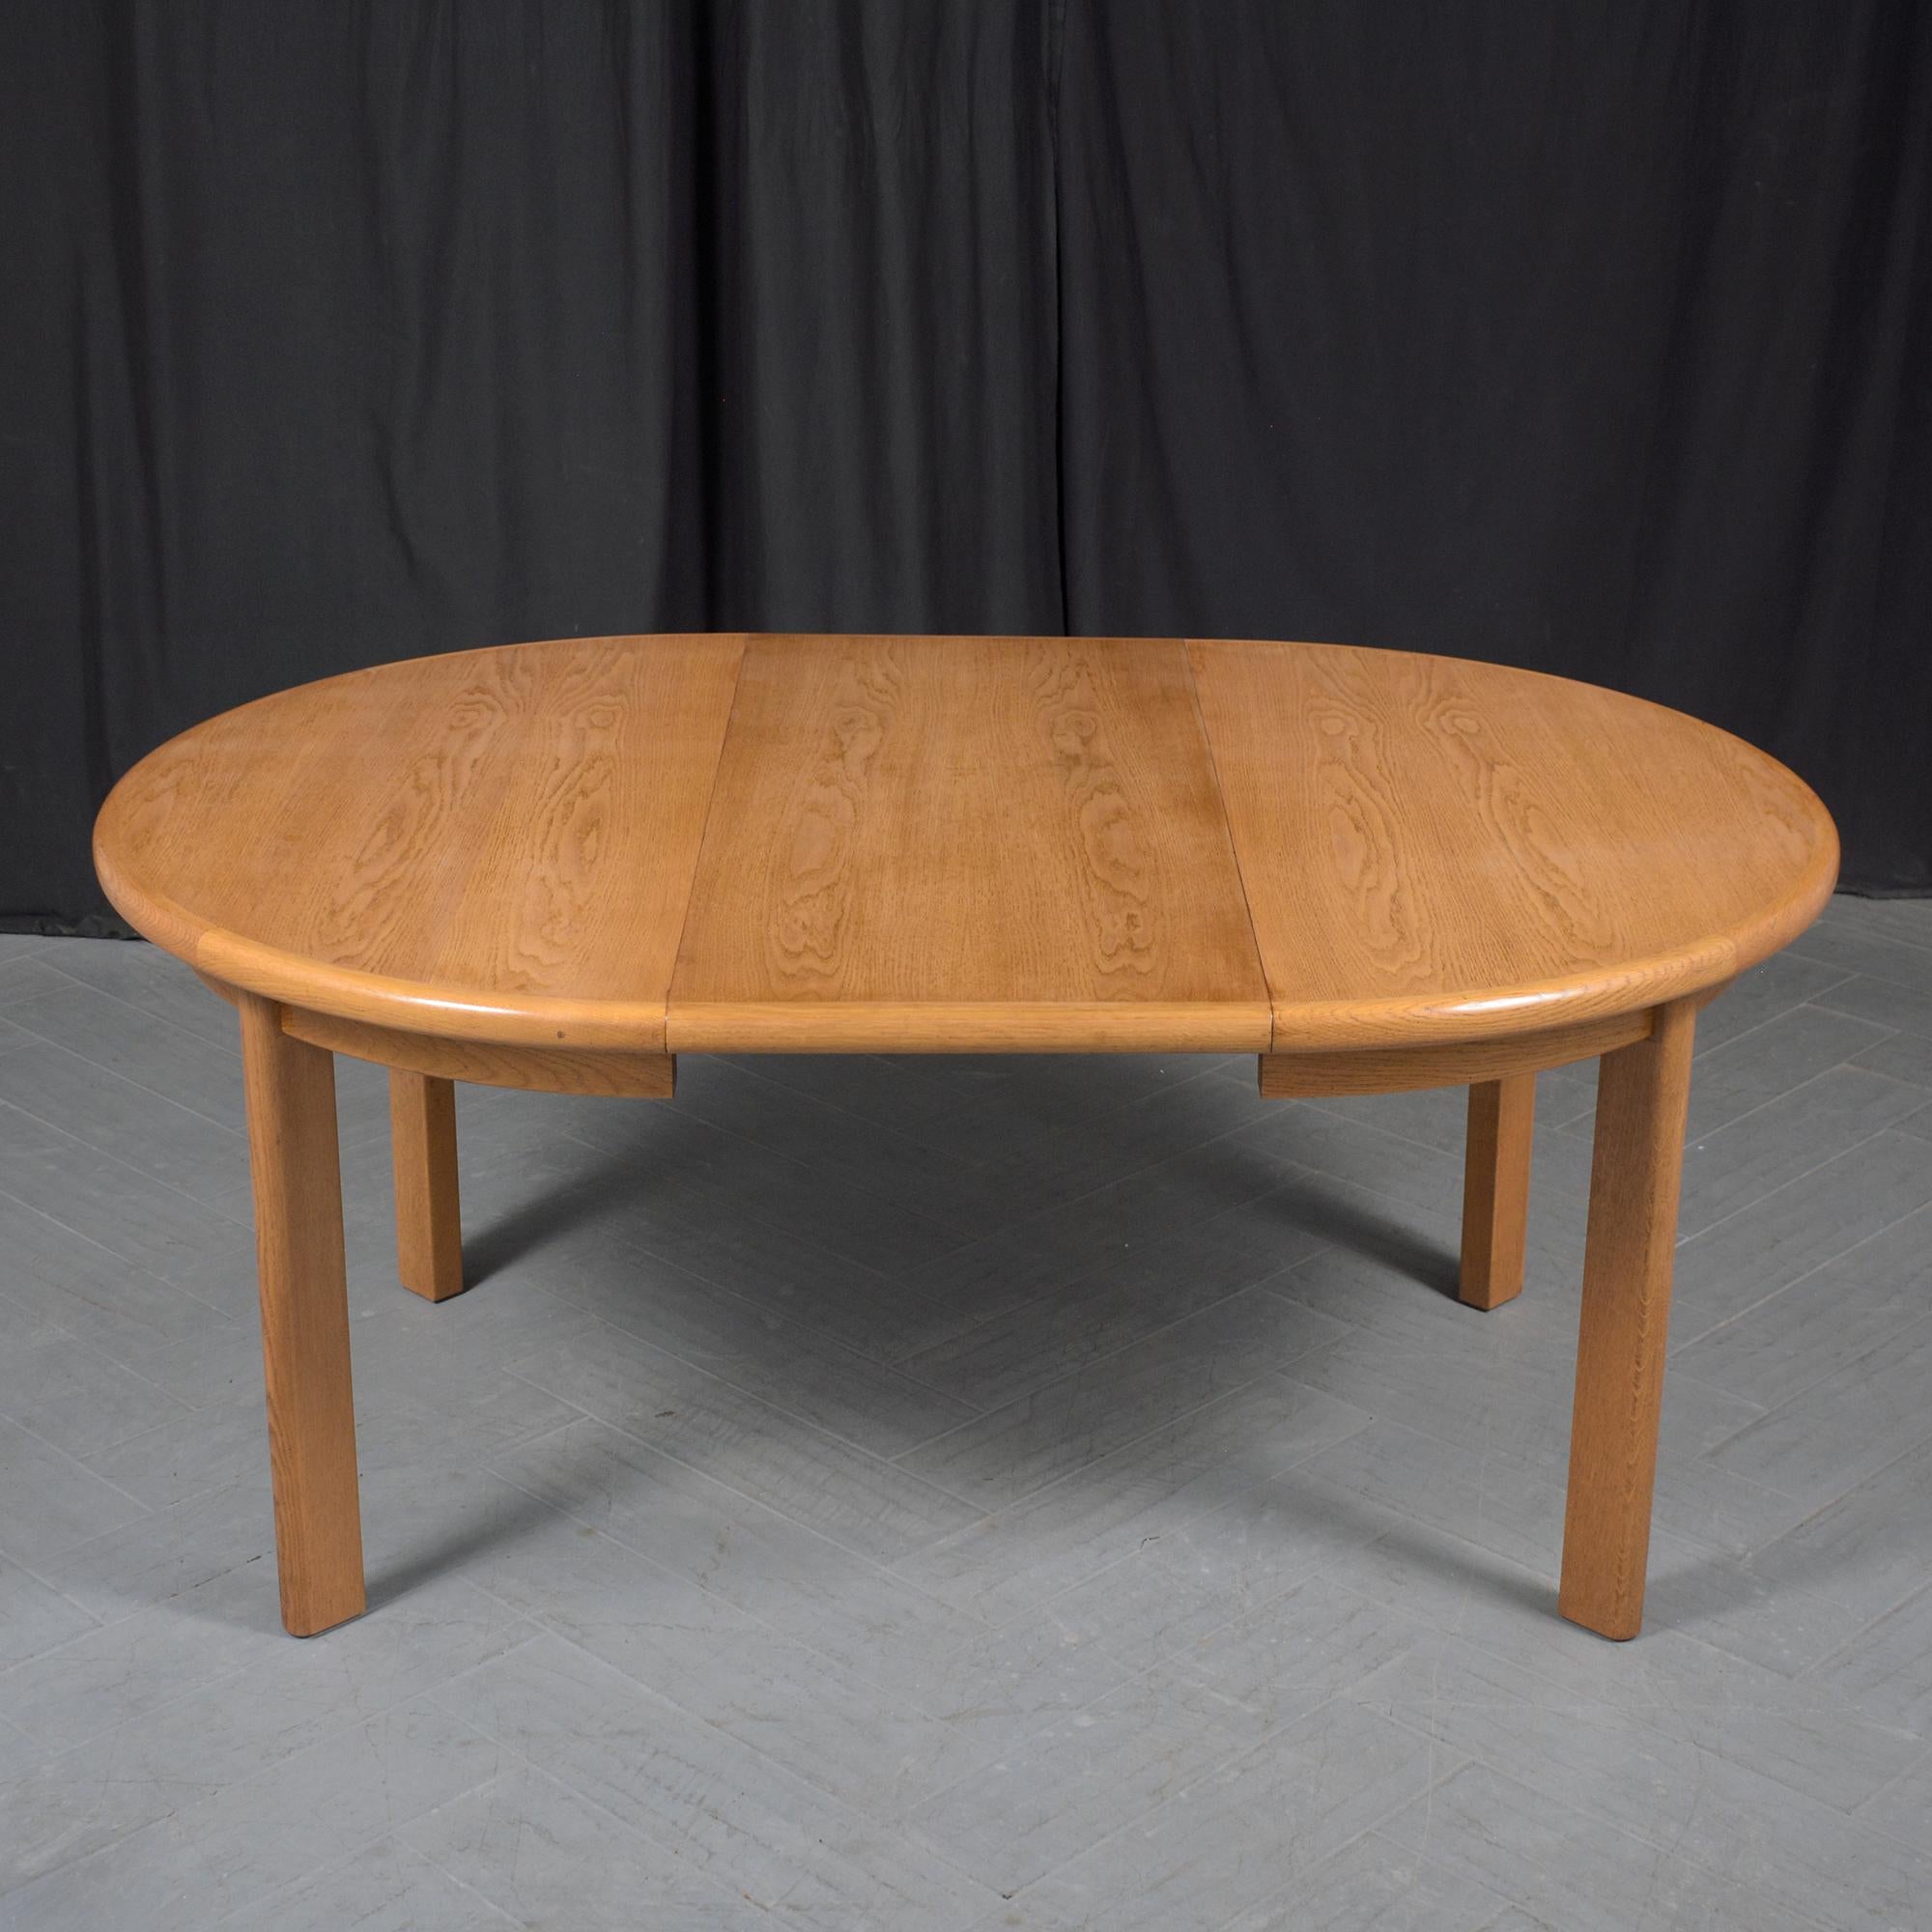 1970s Danish Modern Teak Dining Table with Extendable Leaves For Sale 4